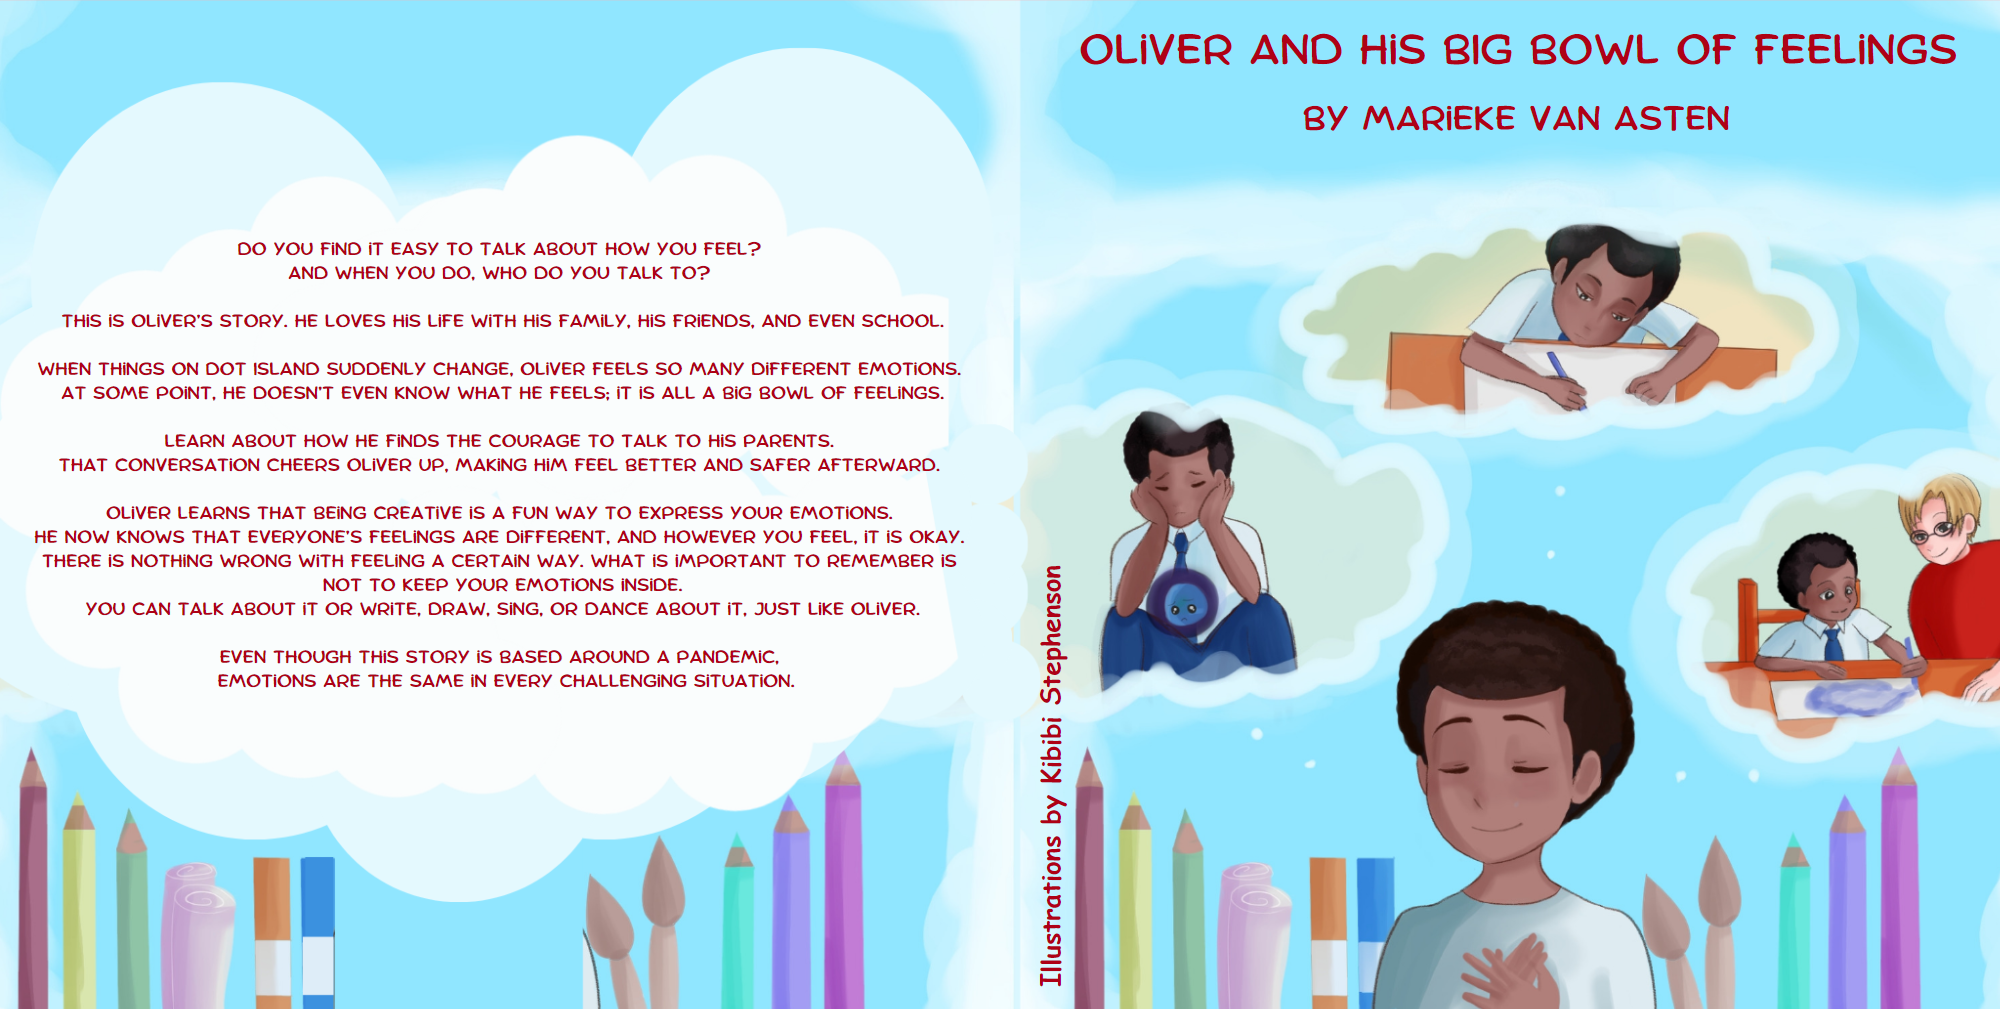 The cover of Oliver and his big bowl of feelings.